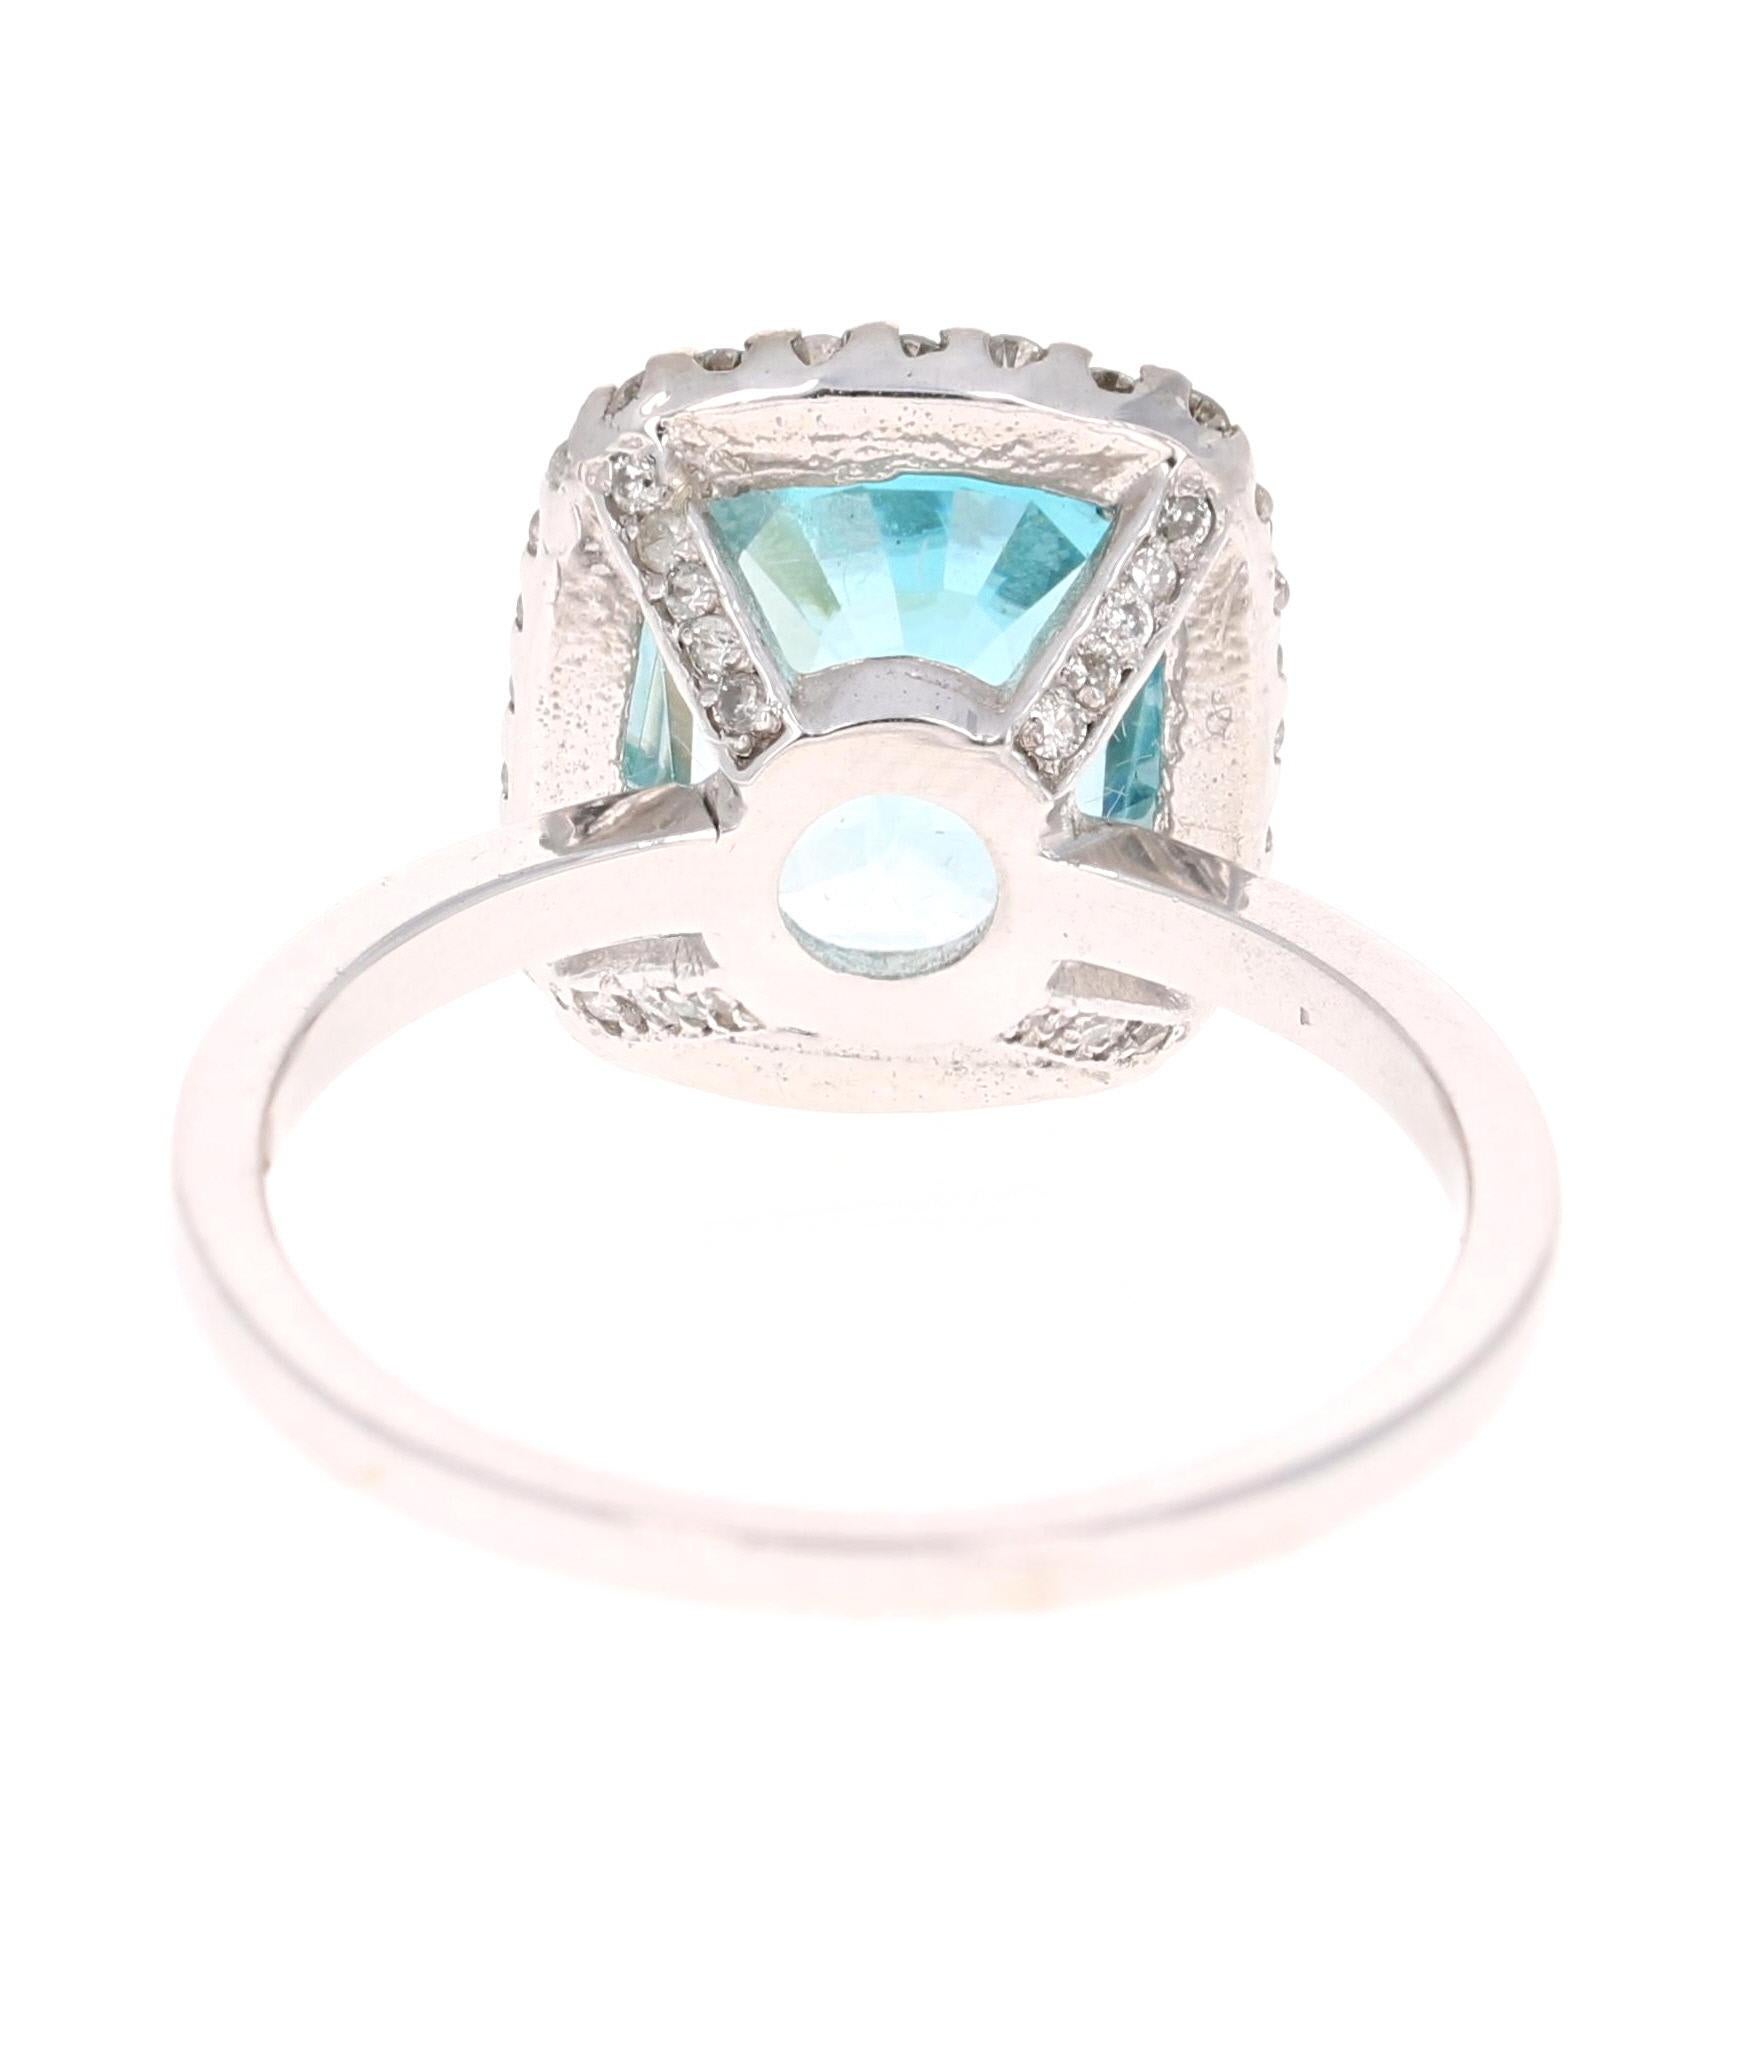 Contemporary 6.28 Carat Blue Zircon Diamond White Gold Cocktail Ring For Sale